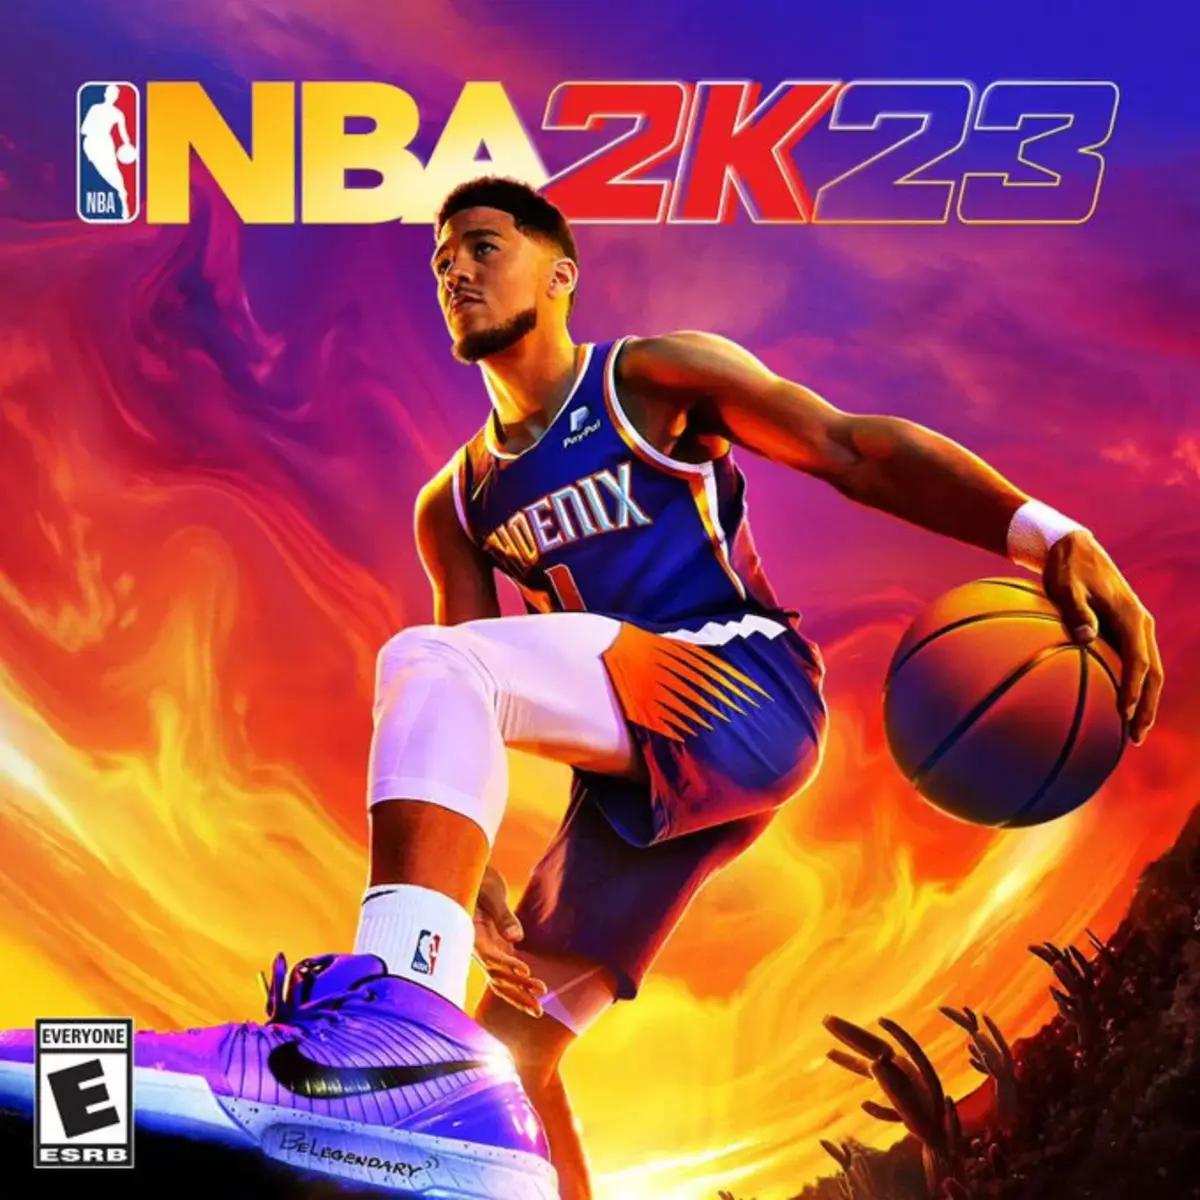 Devin Booker on the NBA 2K23 cover.